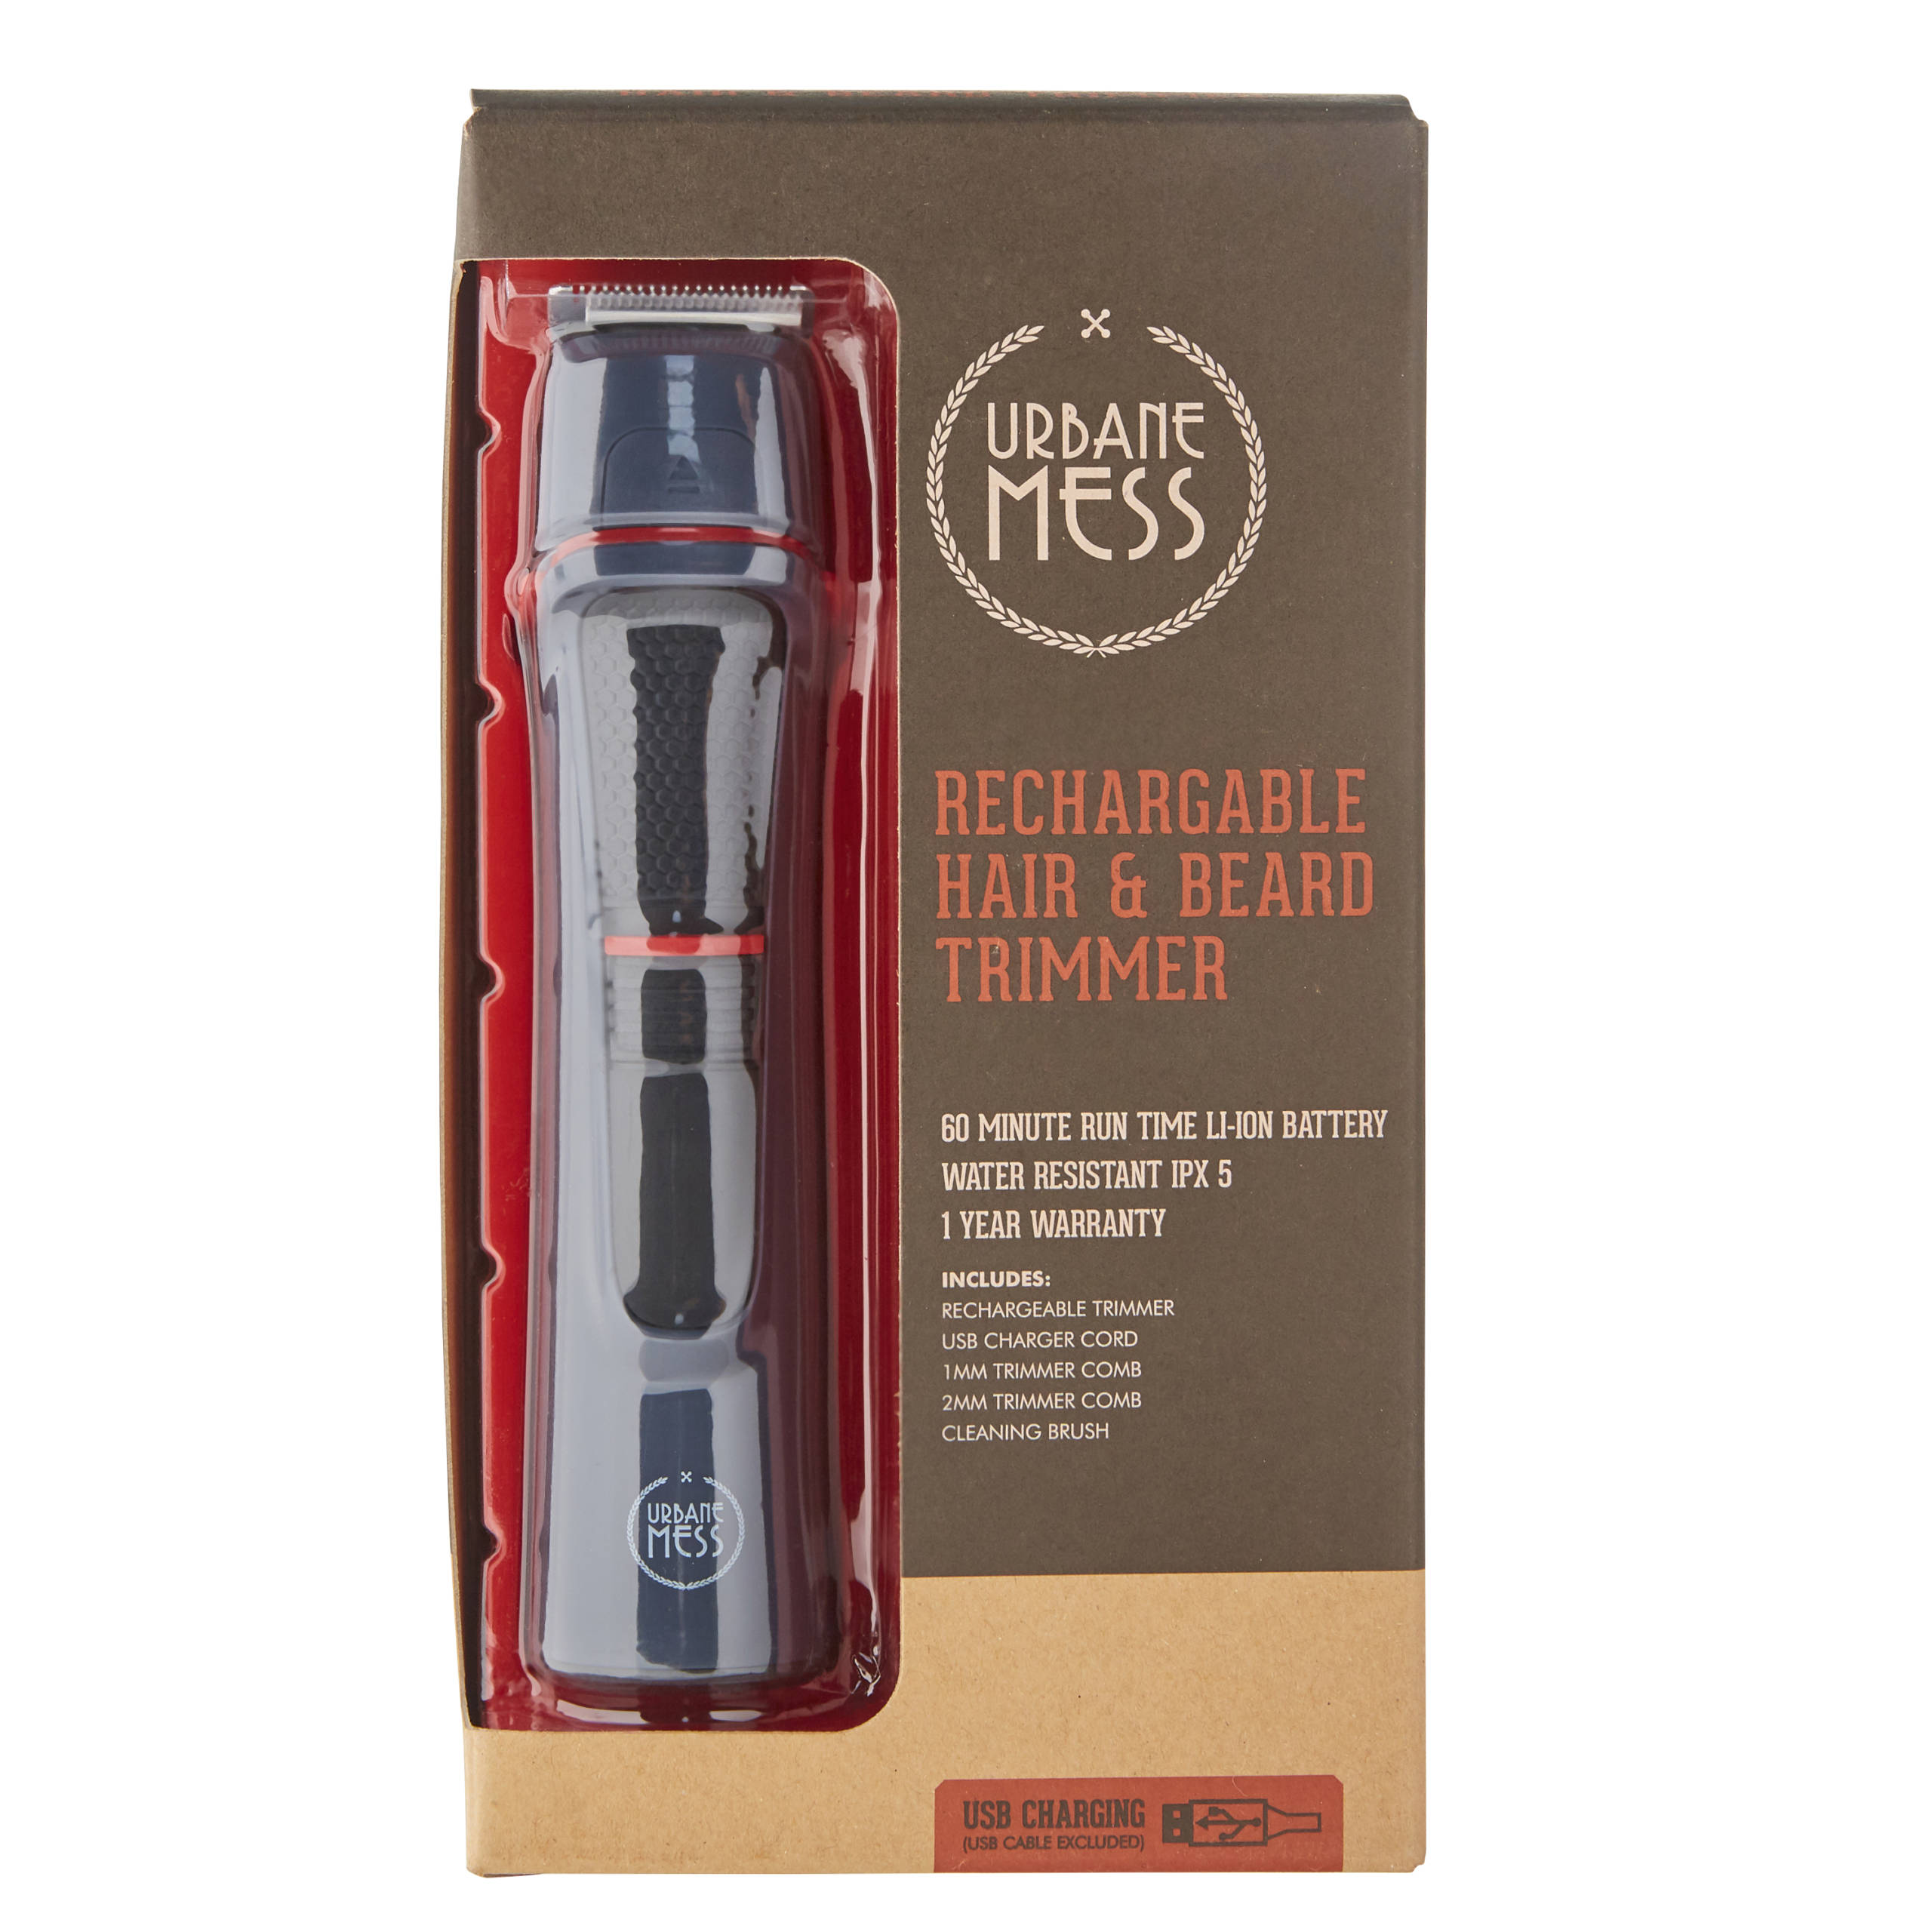 Rechargeable Hair and Beard Trimmer - Urbane Mess